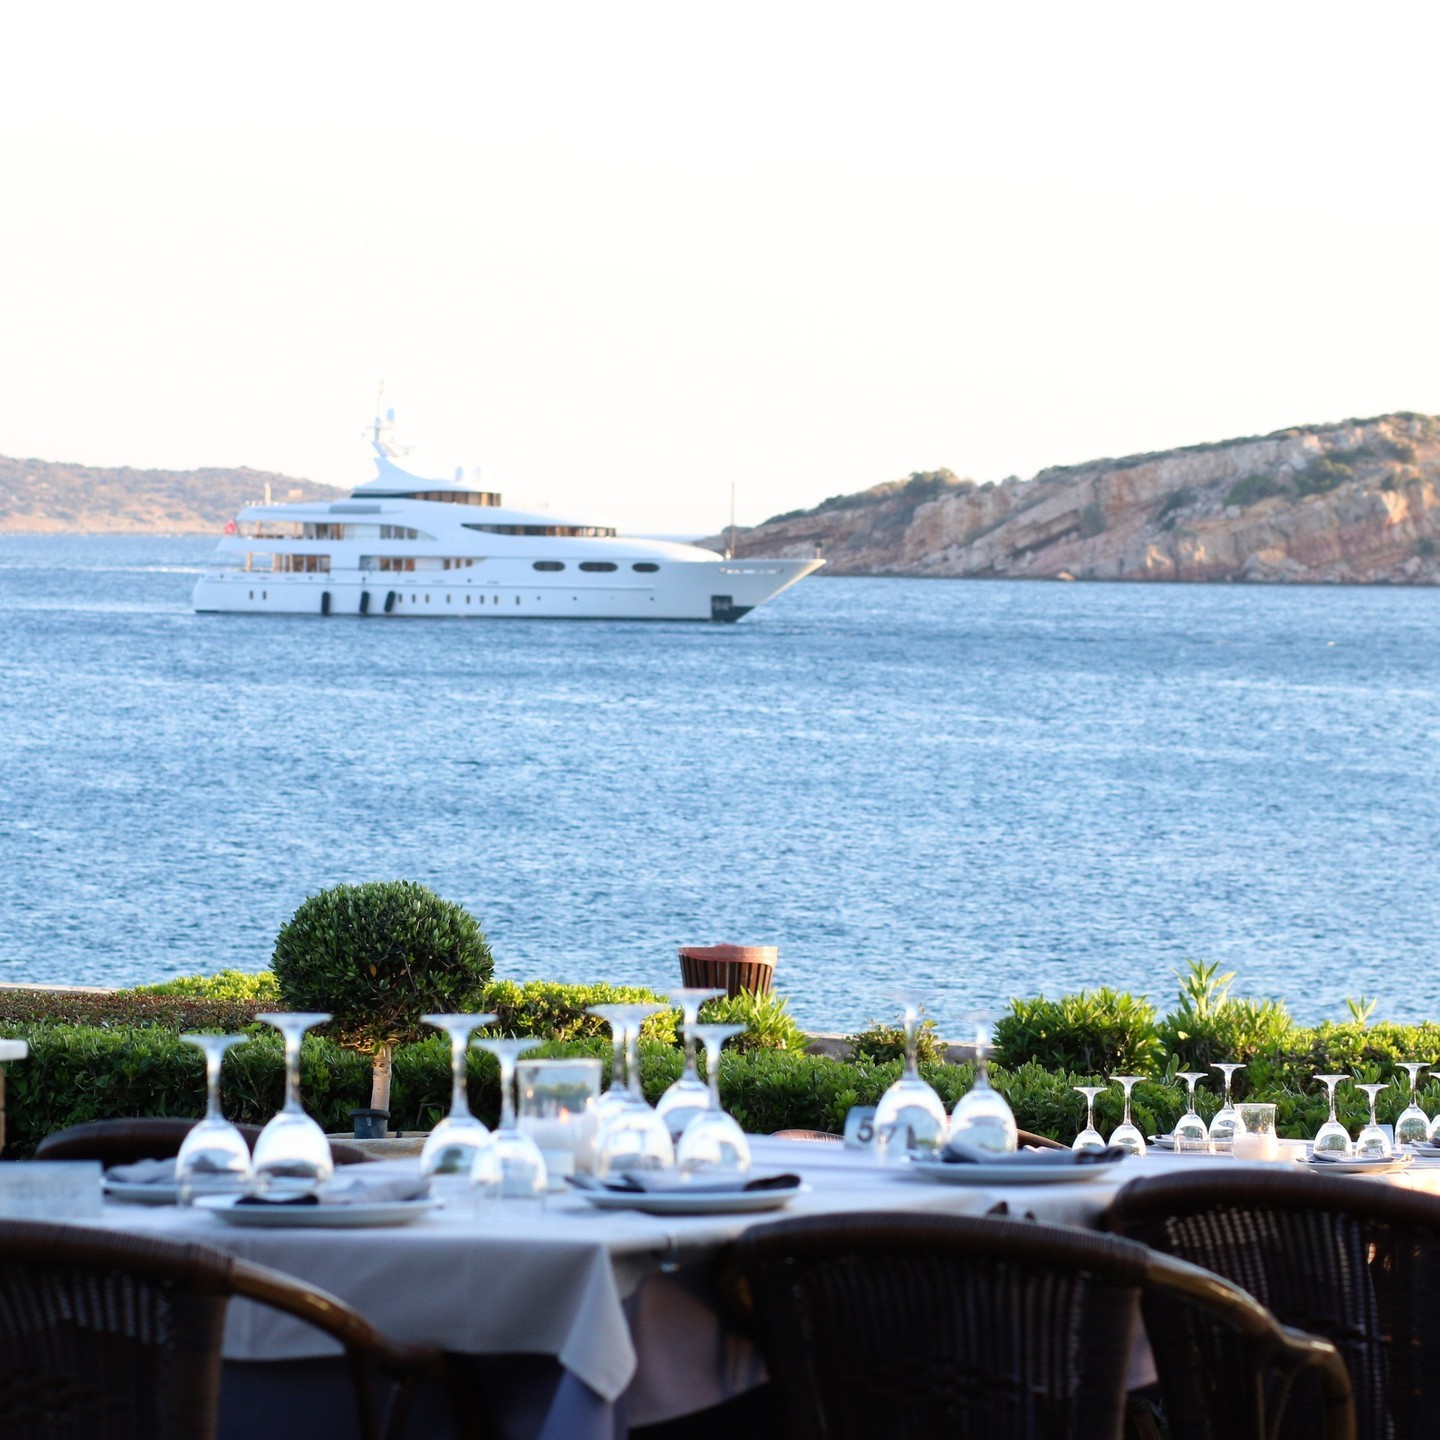 Labros, the perfect place to eat fresh seafood accompanied by a perfect view